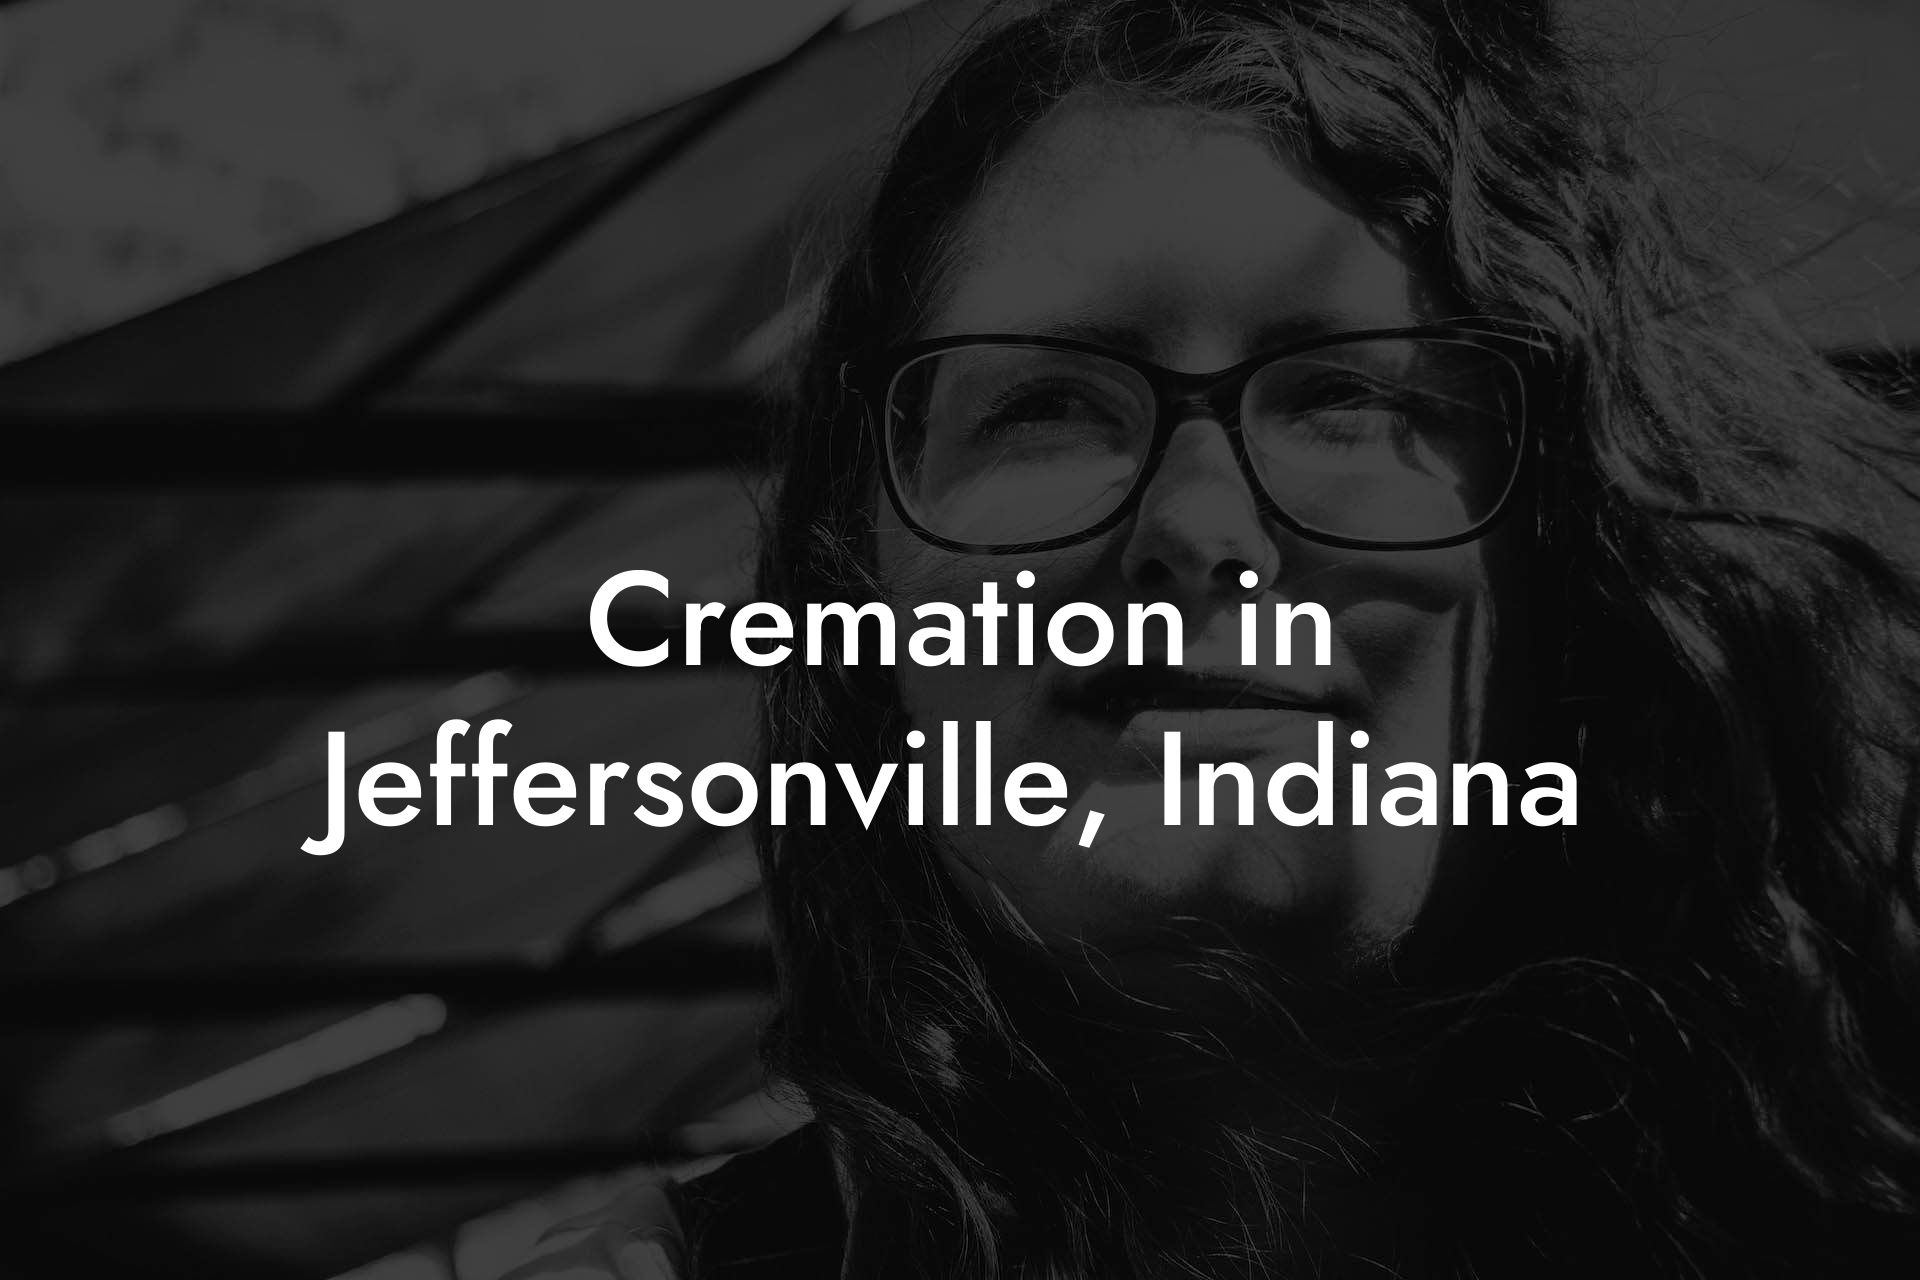 Cremation in Jeffersonville, Indiana